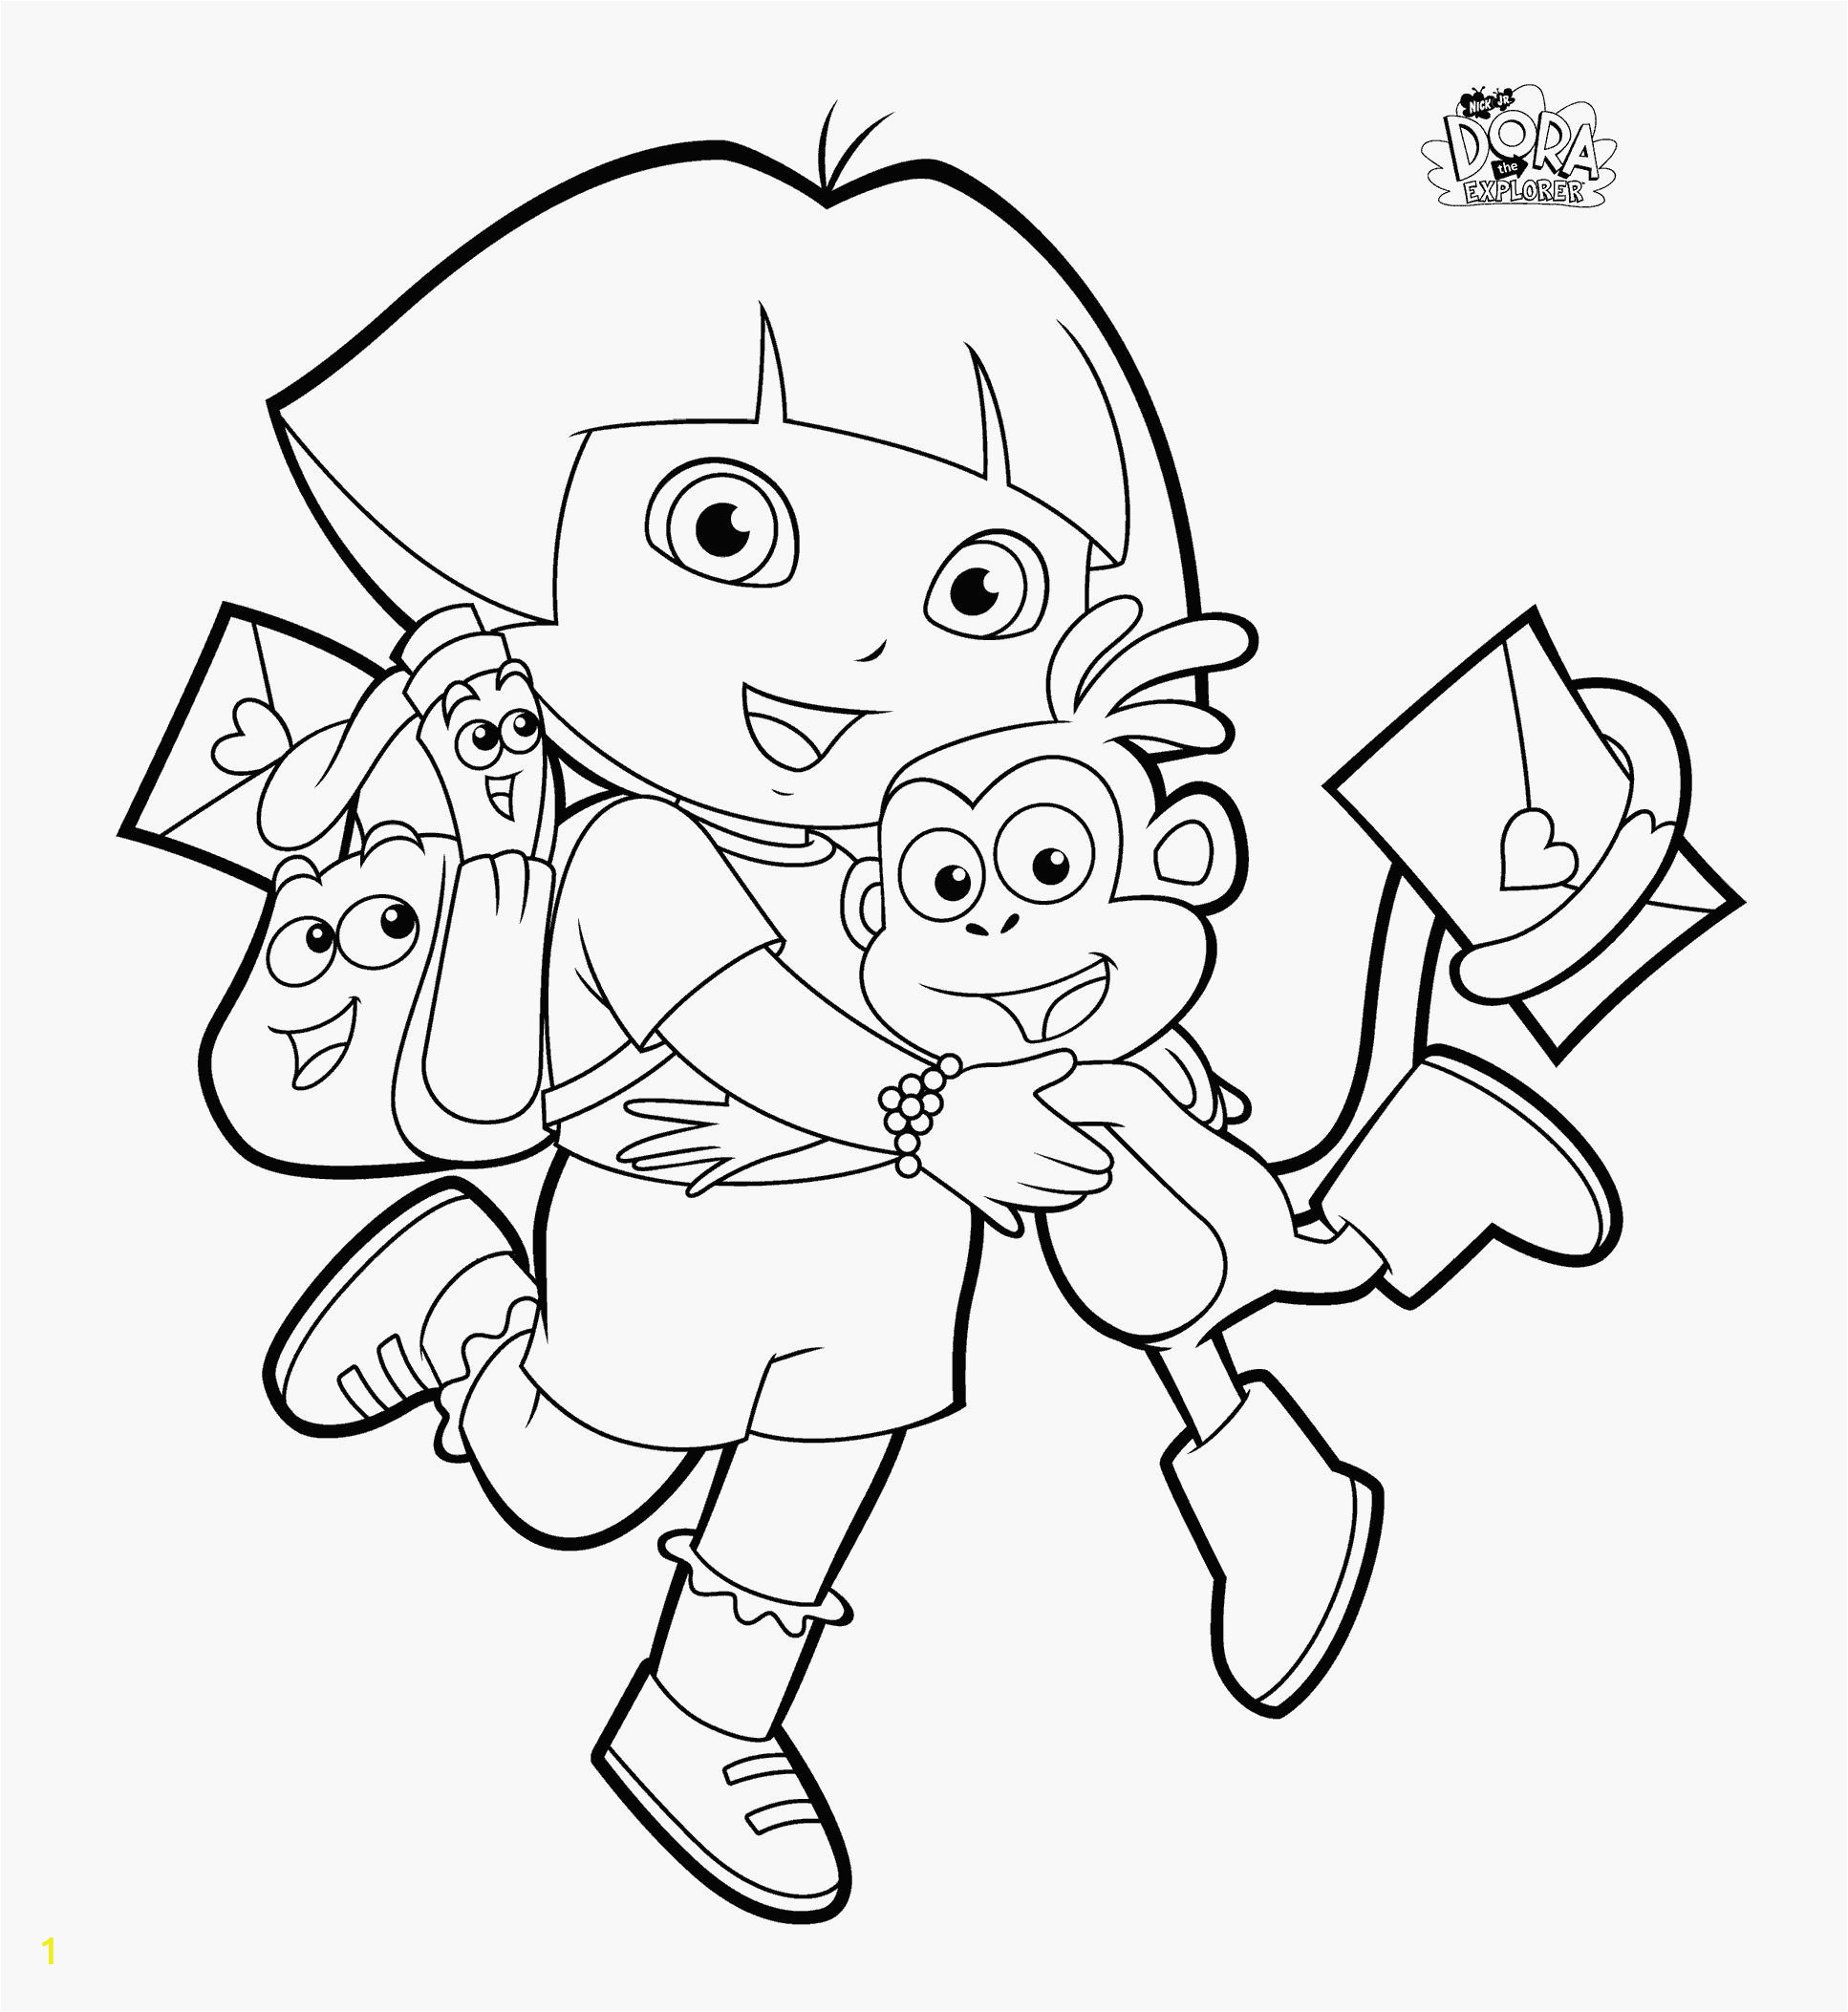 Dora Coloring Pages Halloween Backpack Coloring Page Coloring Pages Dora Coloring Pages